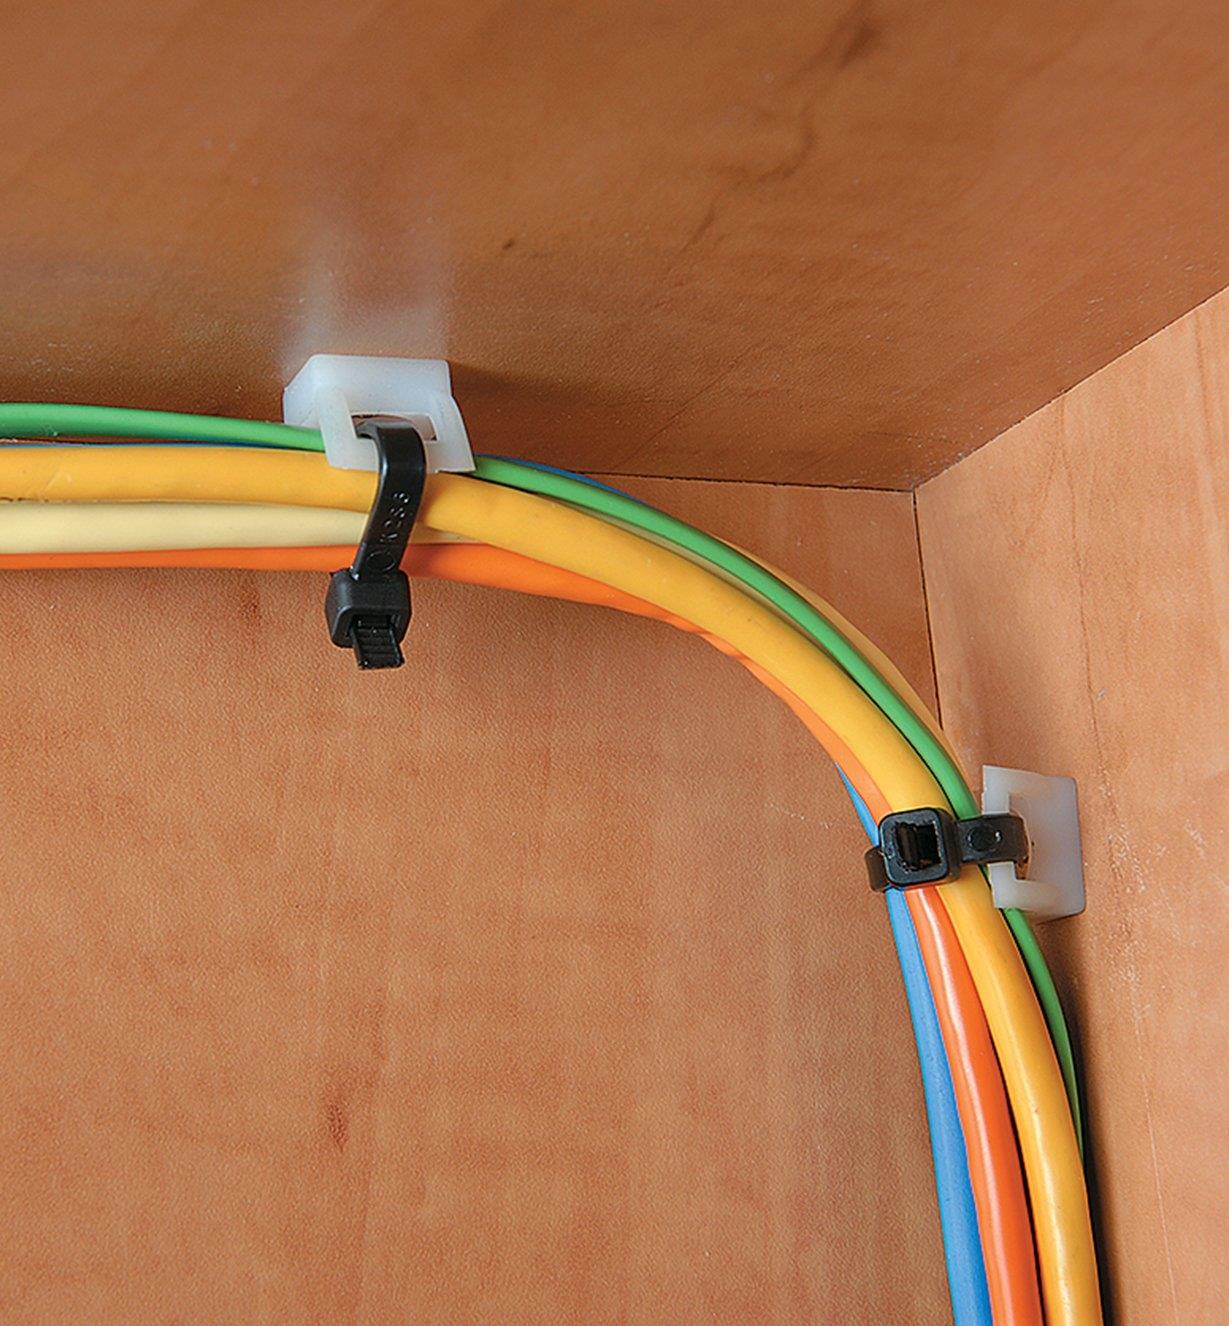 Y-Mount Saddle Cable Tie-Mounts used to attach cable ties to the inside of a cabinet